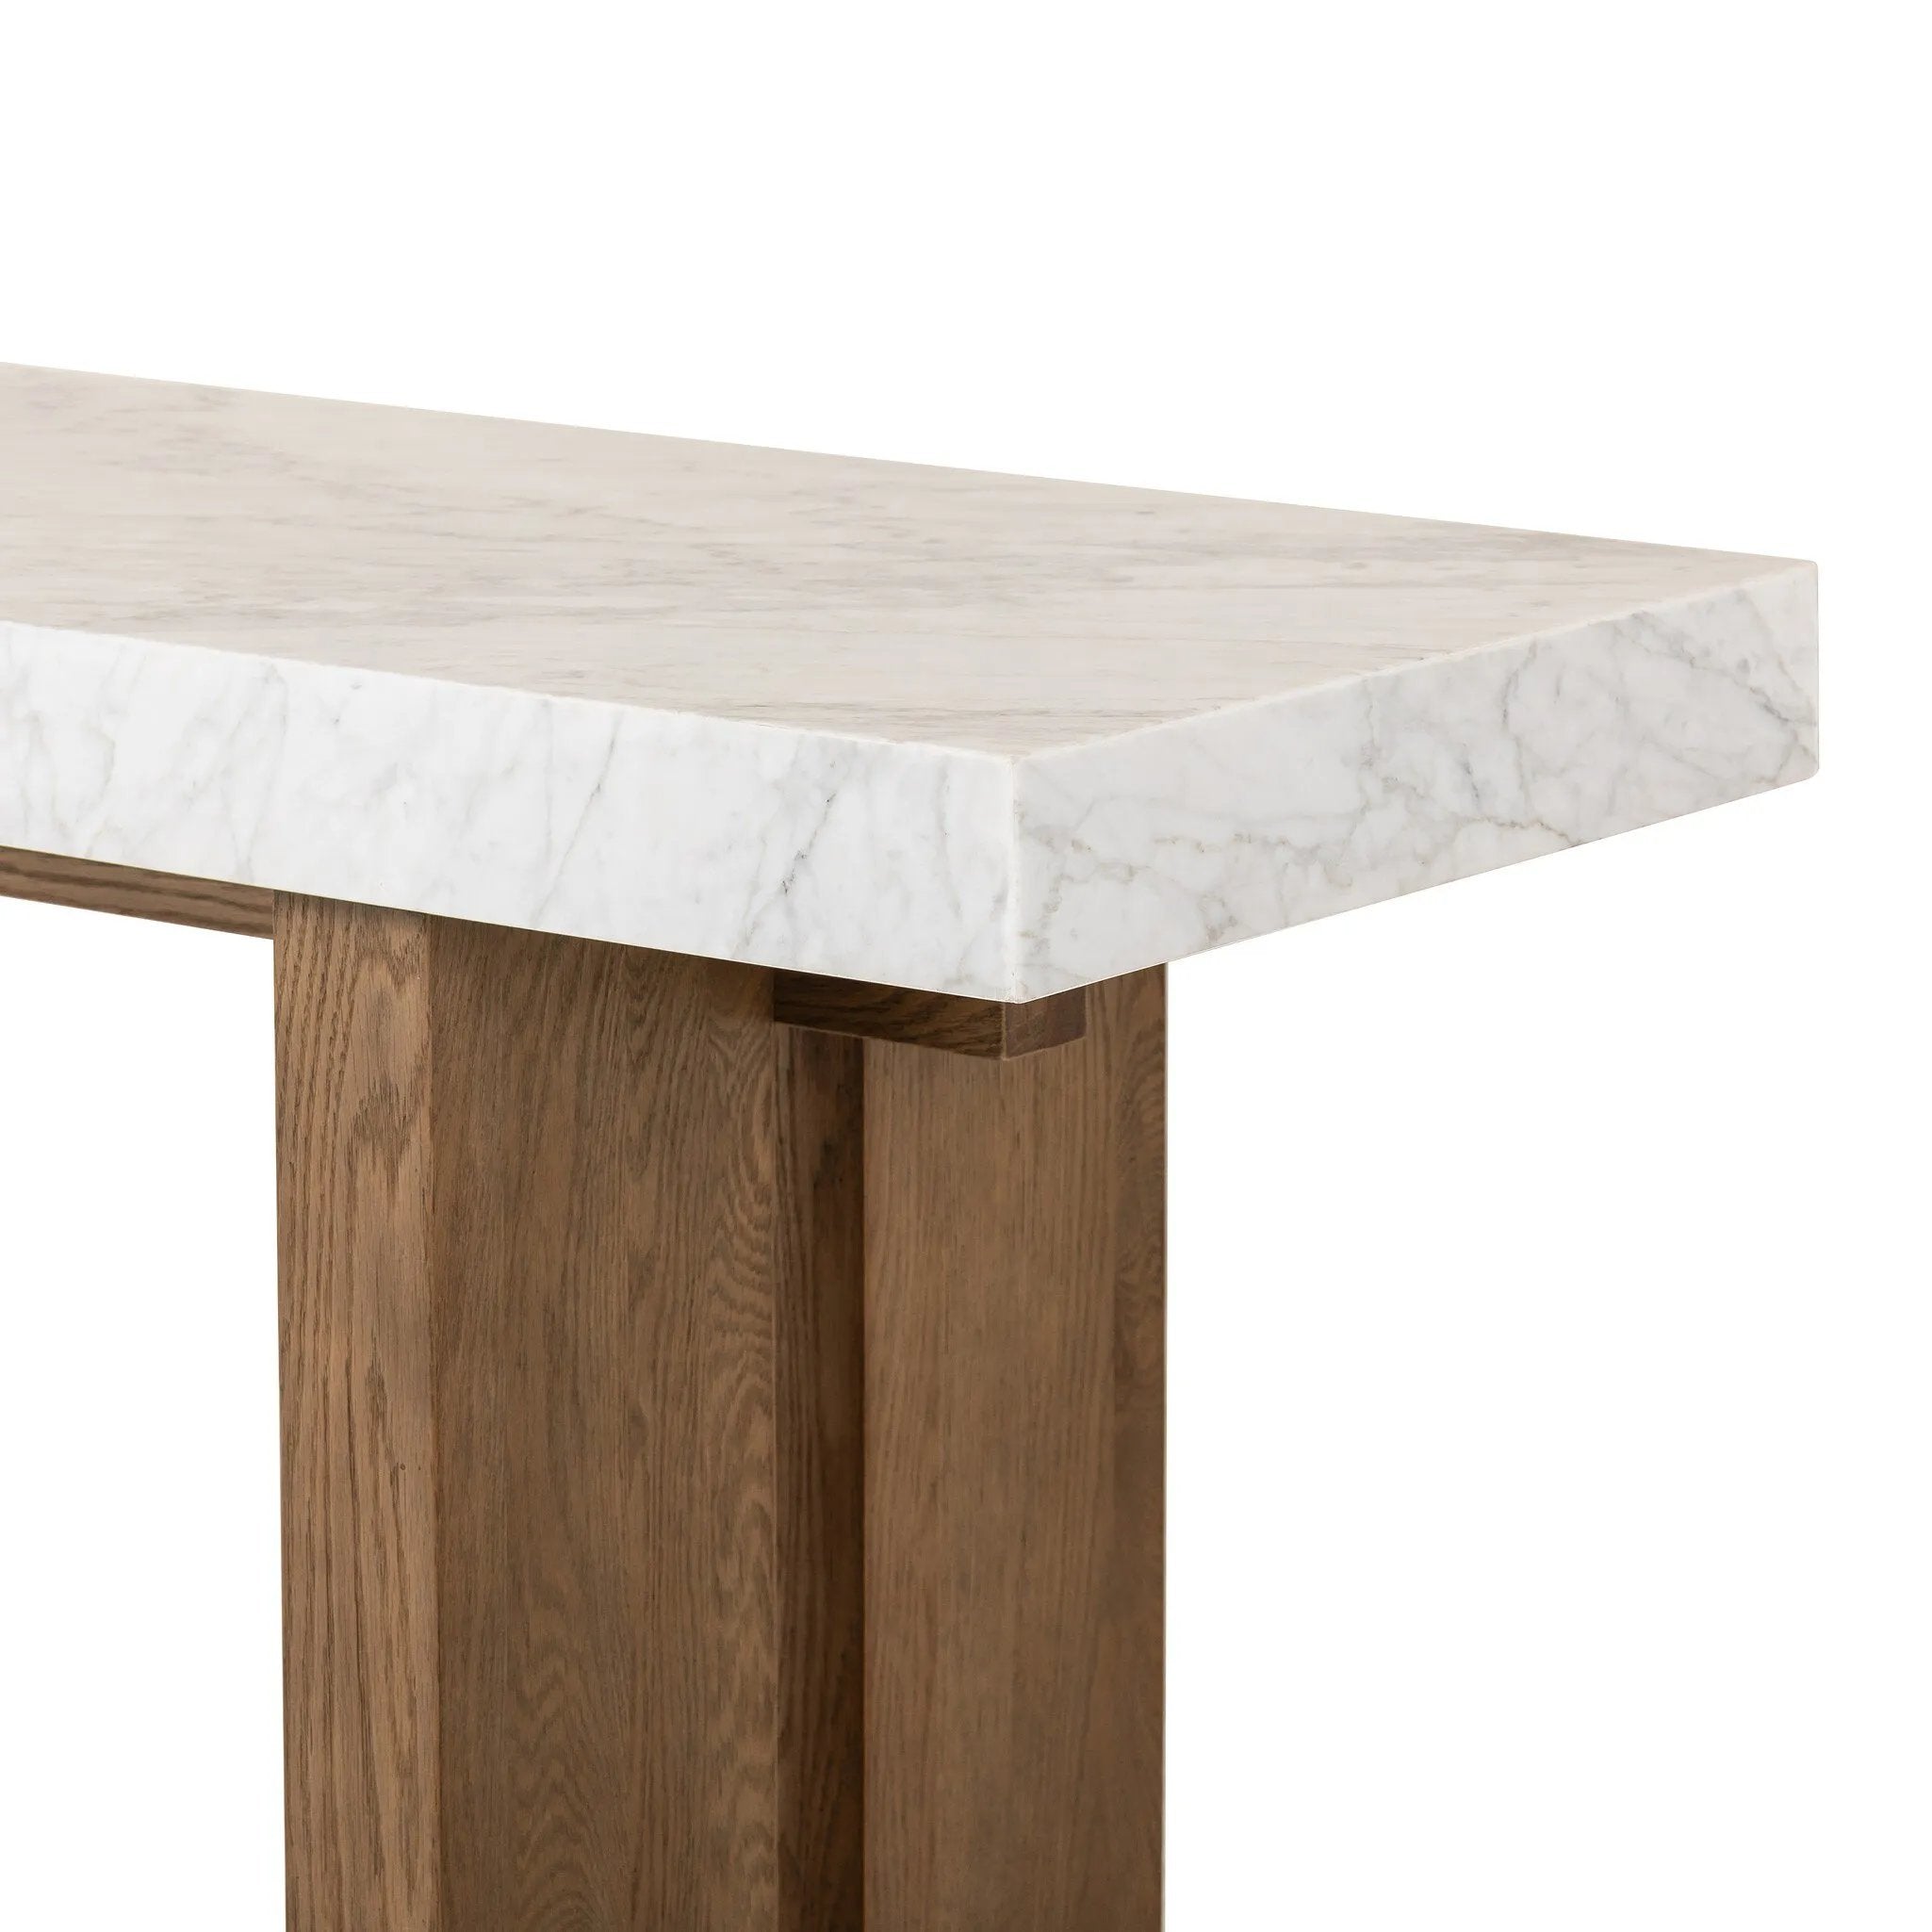 Structured and geometric, an open-style console table pairs smoked oak veneer with white marble, for a sophisticated material mix.Collection: Hughe Amethyst Home provides interior design, new home construction design consulting, vintage area rugs, and lighting in the Park City metro area.